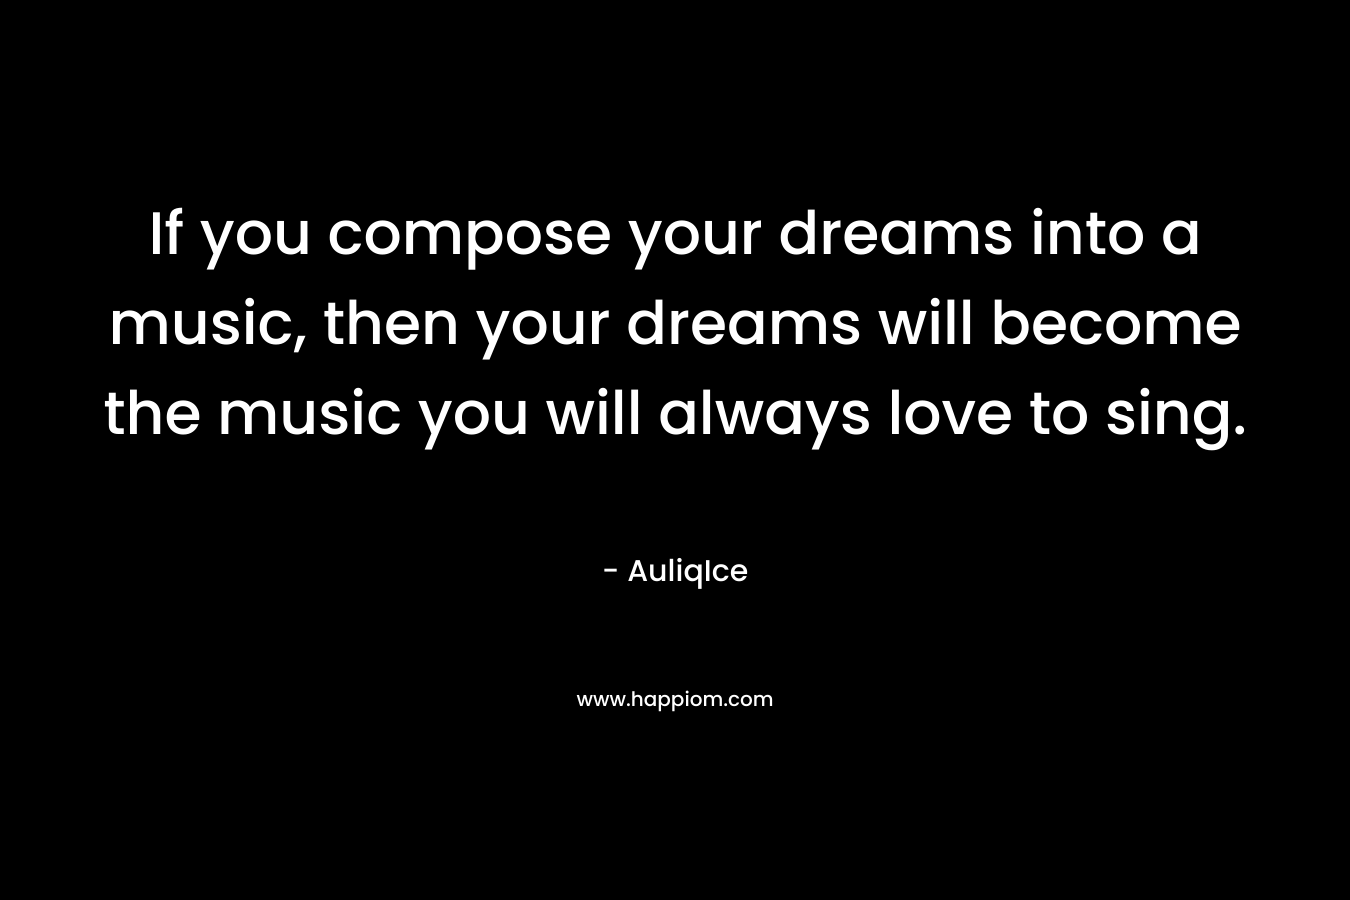 If you compose your dreams into a music, then your dreams will become the music you will always love to sing.